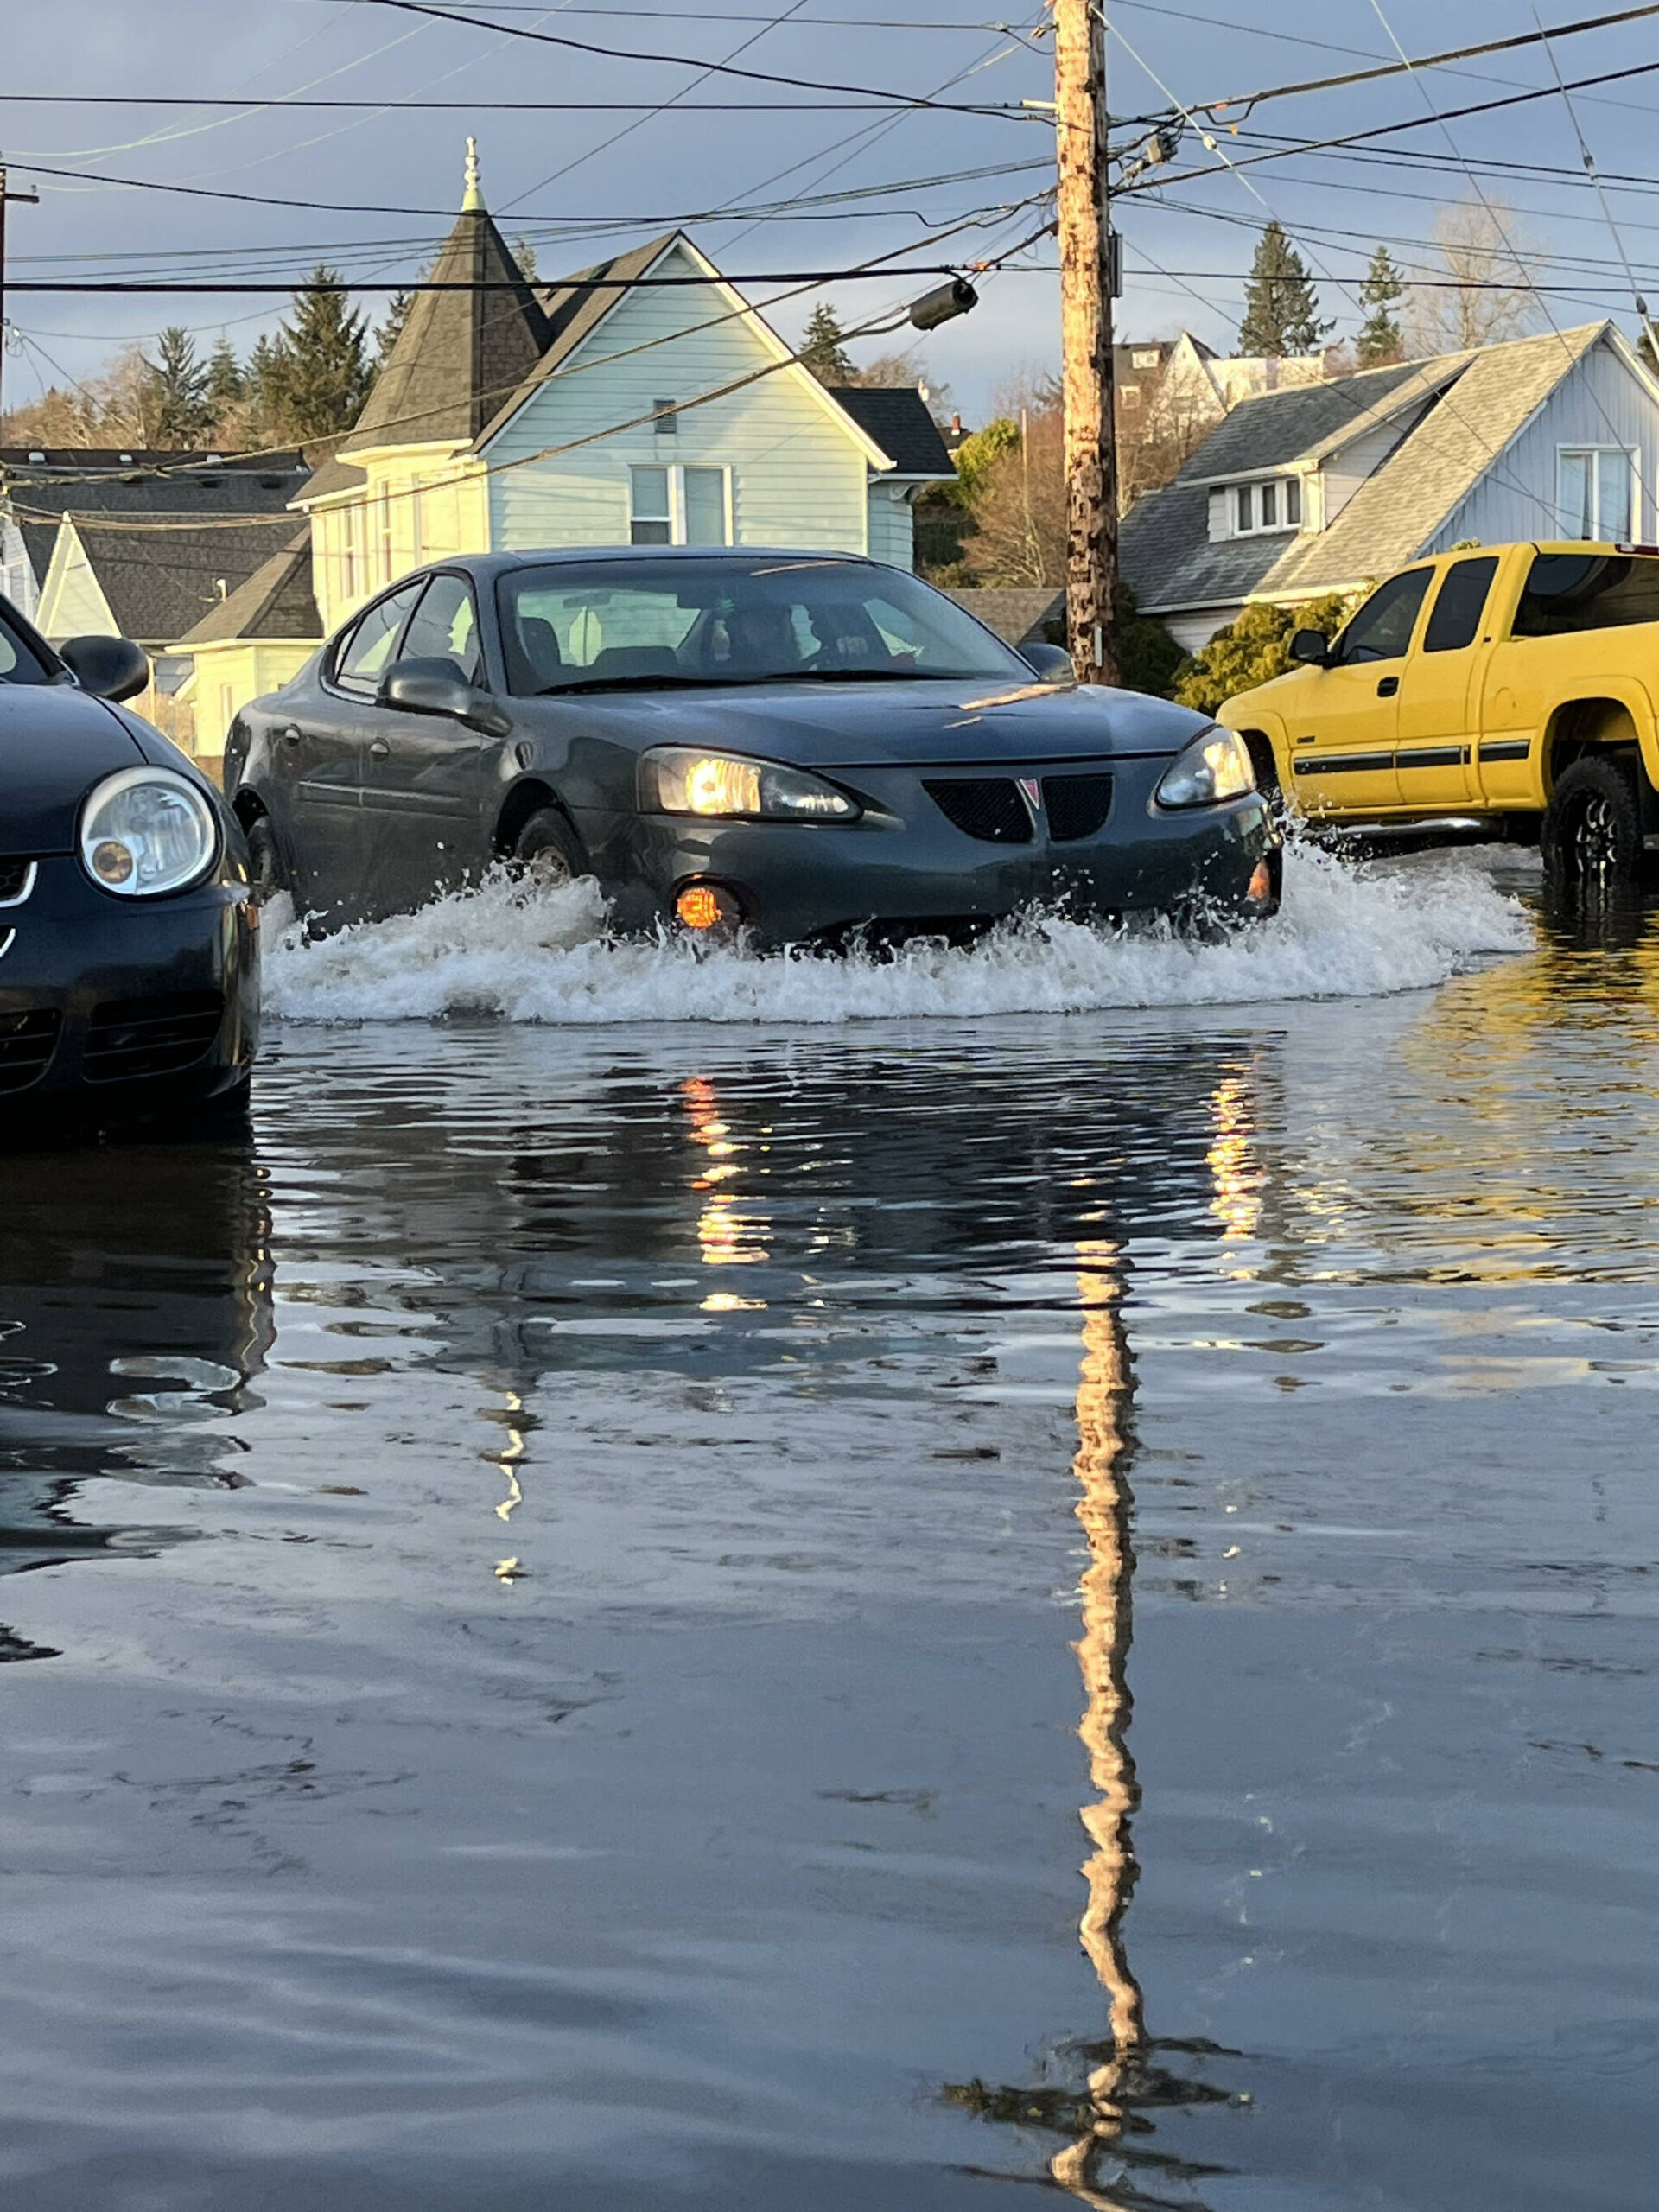 Matthew N. Wells / The Daily World
A Pontiac sedan causes a wake after high tide on Jan. 3, 2022, down E. 1st St., and N. F St., in Aberdeen. Mass flooding throughout Aberdeen and Hoquiam, along with several other environmental factors, caused plenty of cars to turn around to avoid flooding. The Aberdeen-Hoquiam Flood Protection project’s funding is supposed to be bolstered soon by the state. The expected $35.5 million will bring Aberdeen and Hoquiam closer to the construction of the North Shore Levee and the North Shore Levee West segment.